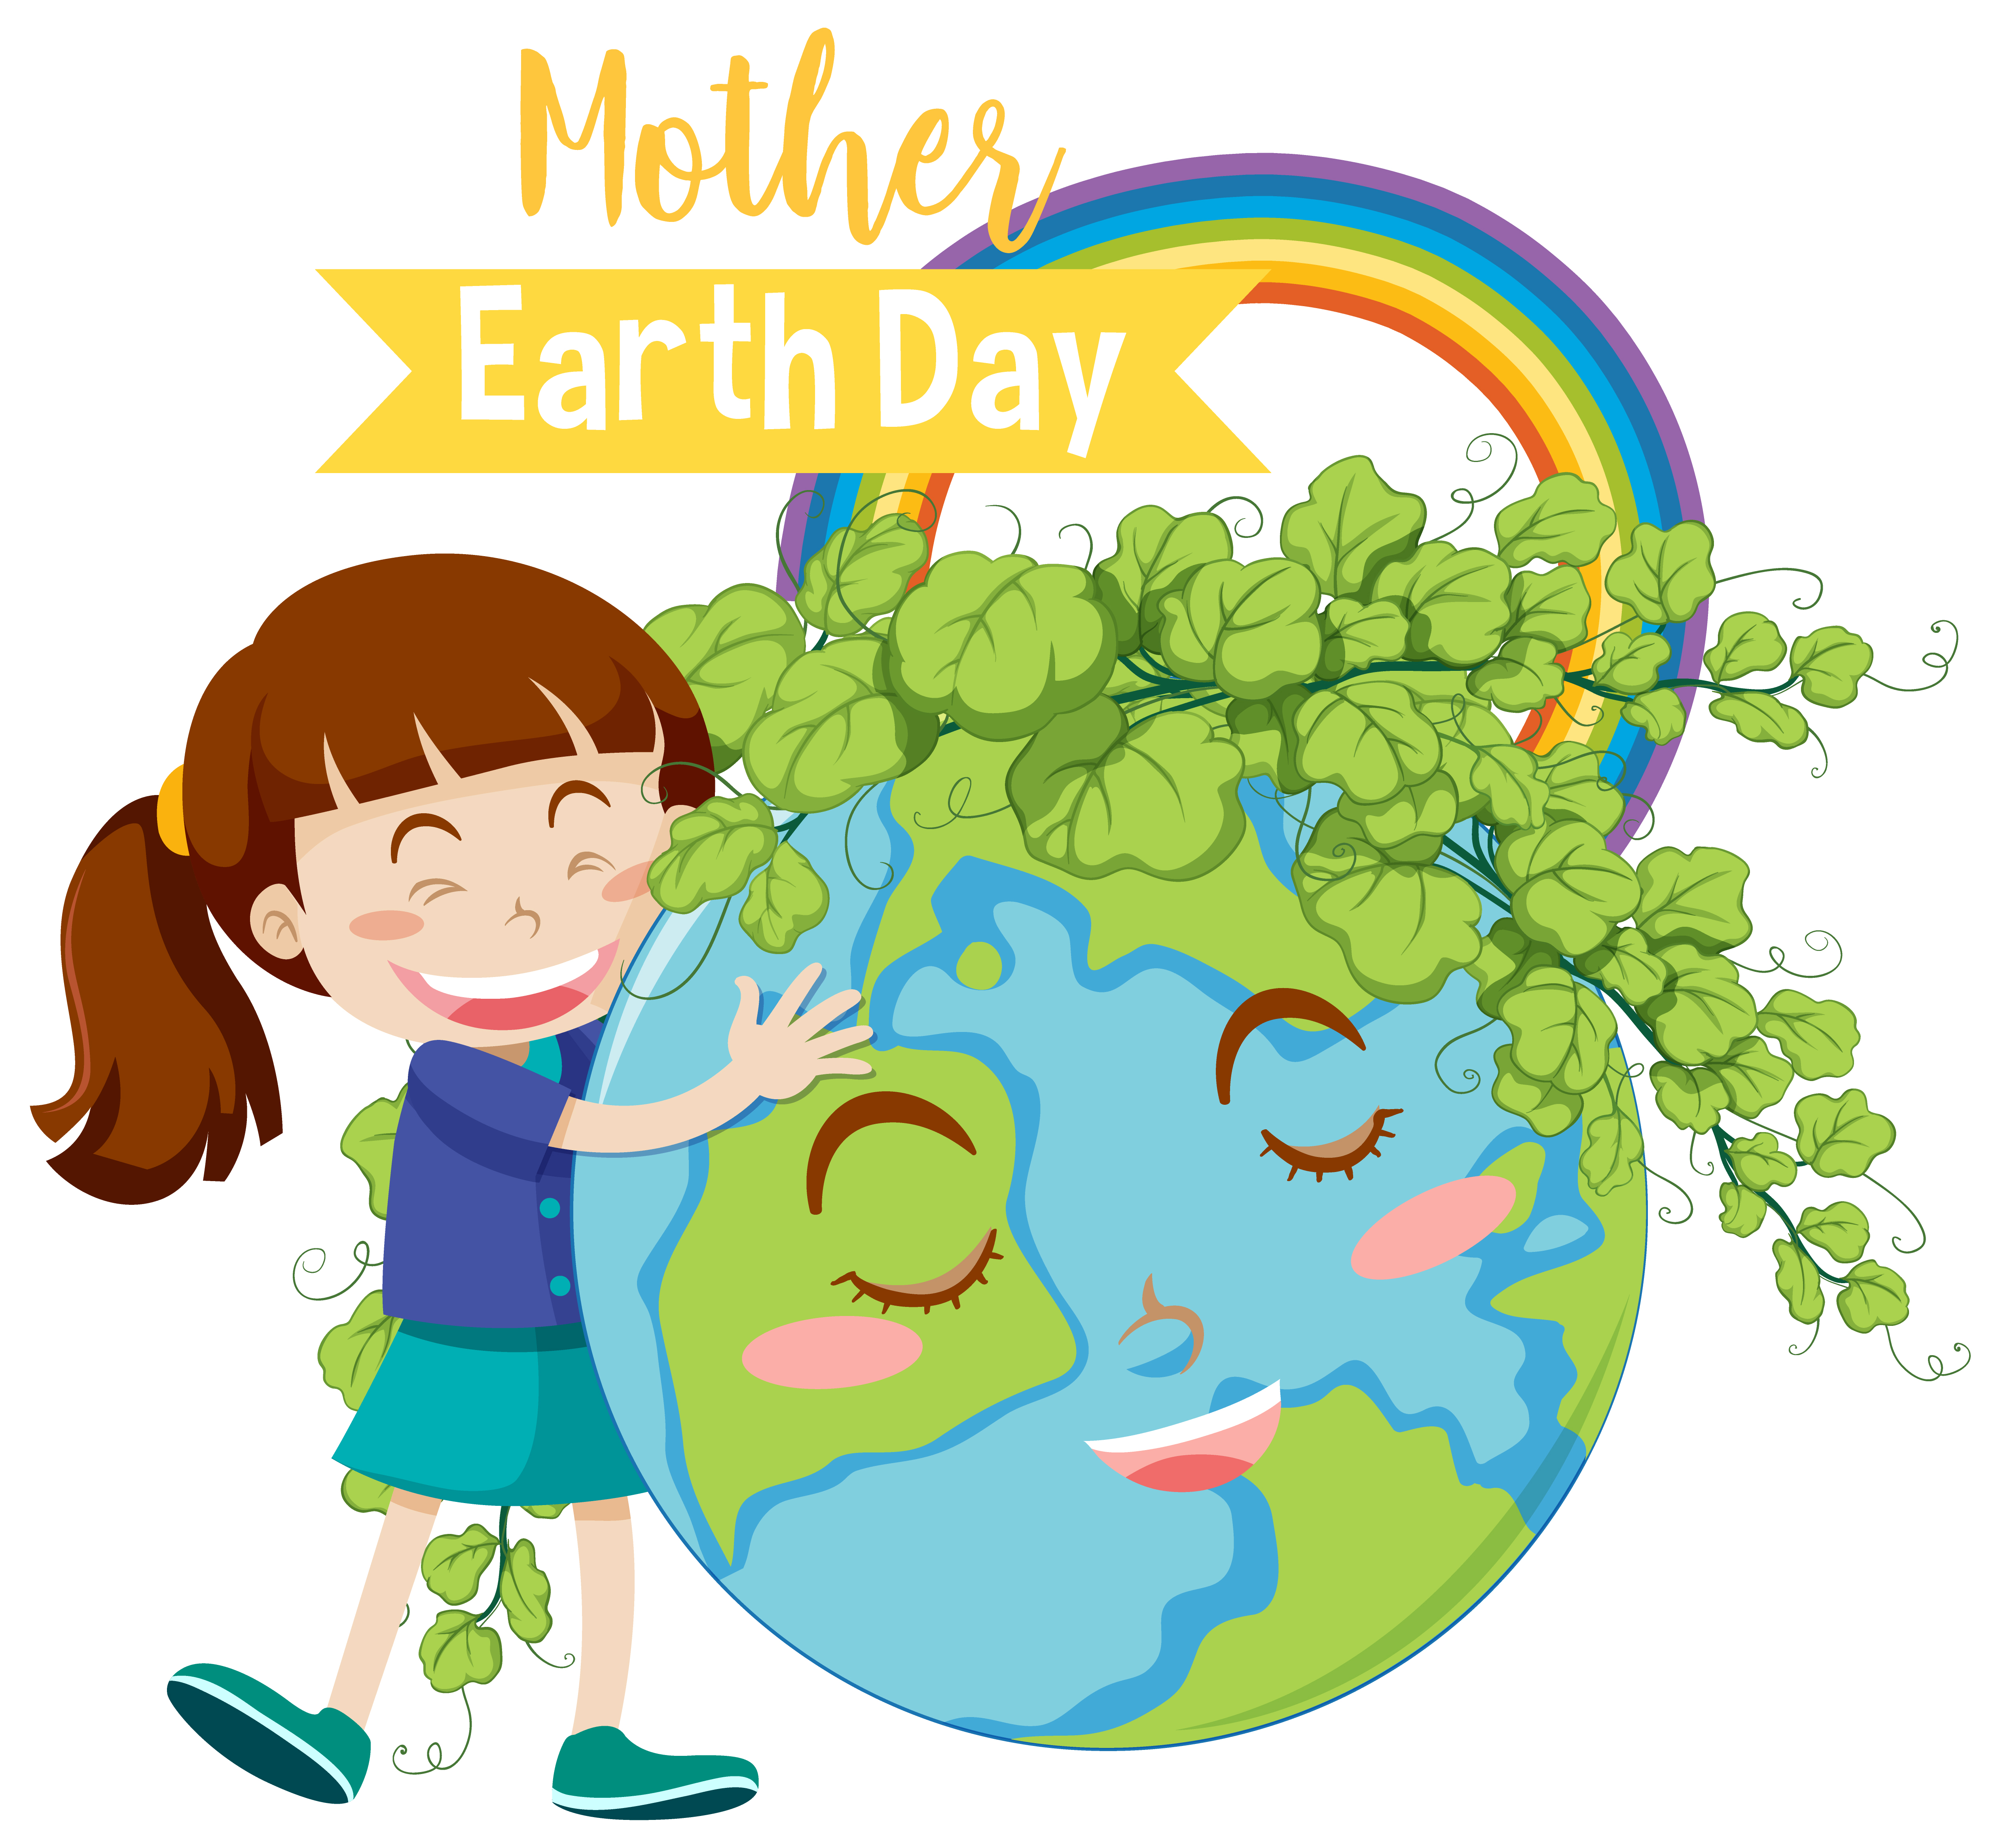 ''Mother Earth Day'' with Girl Hugging Earth Globe with Leaves 1102769